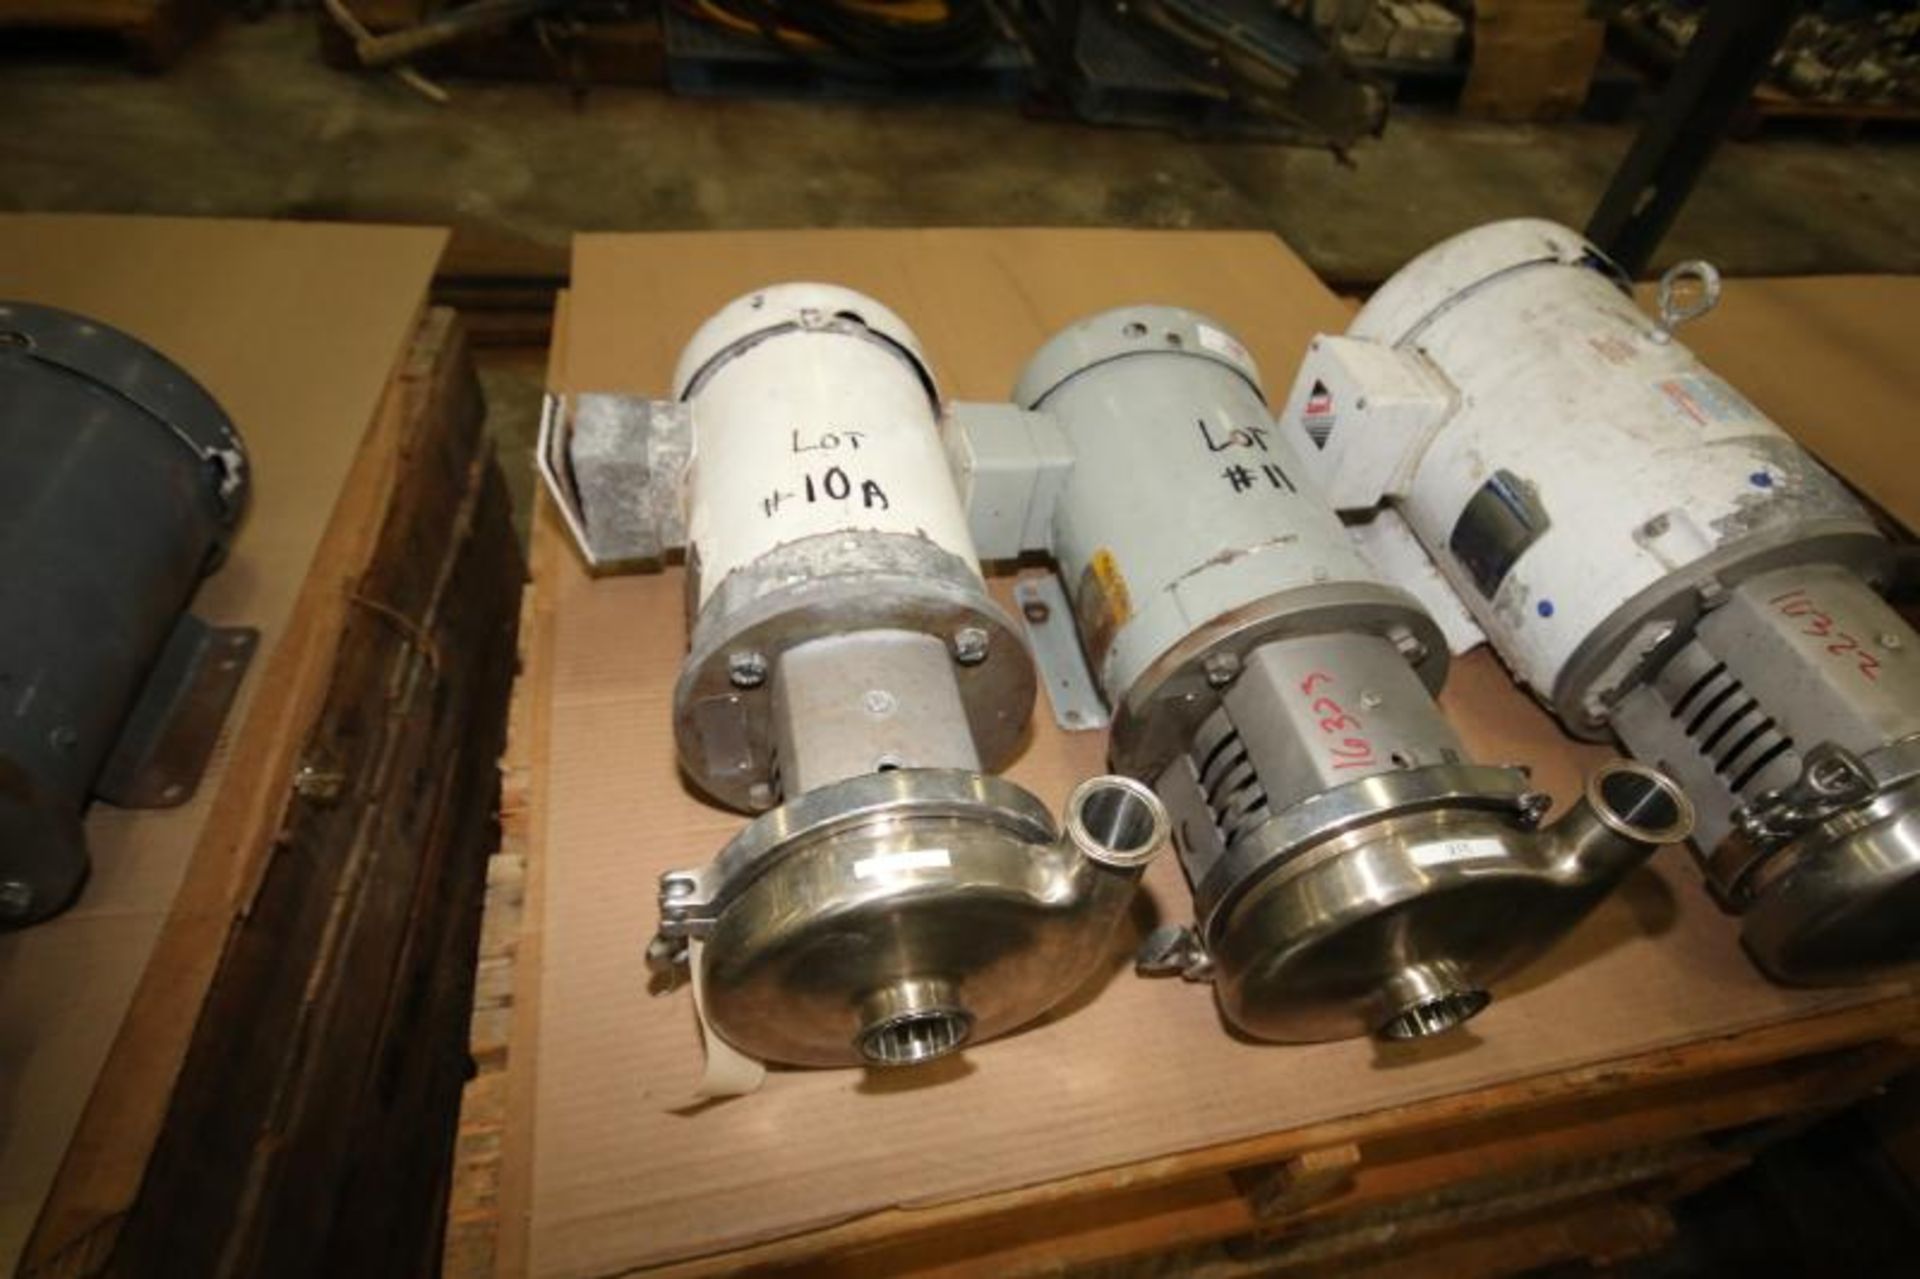 Ampco 5 hp / 2.5 hp Centrifugal Pump, Model C216MDG18T-S, S/N CC45-930-1-1 with 2" x 1-1/2" Clamp